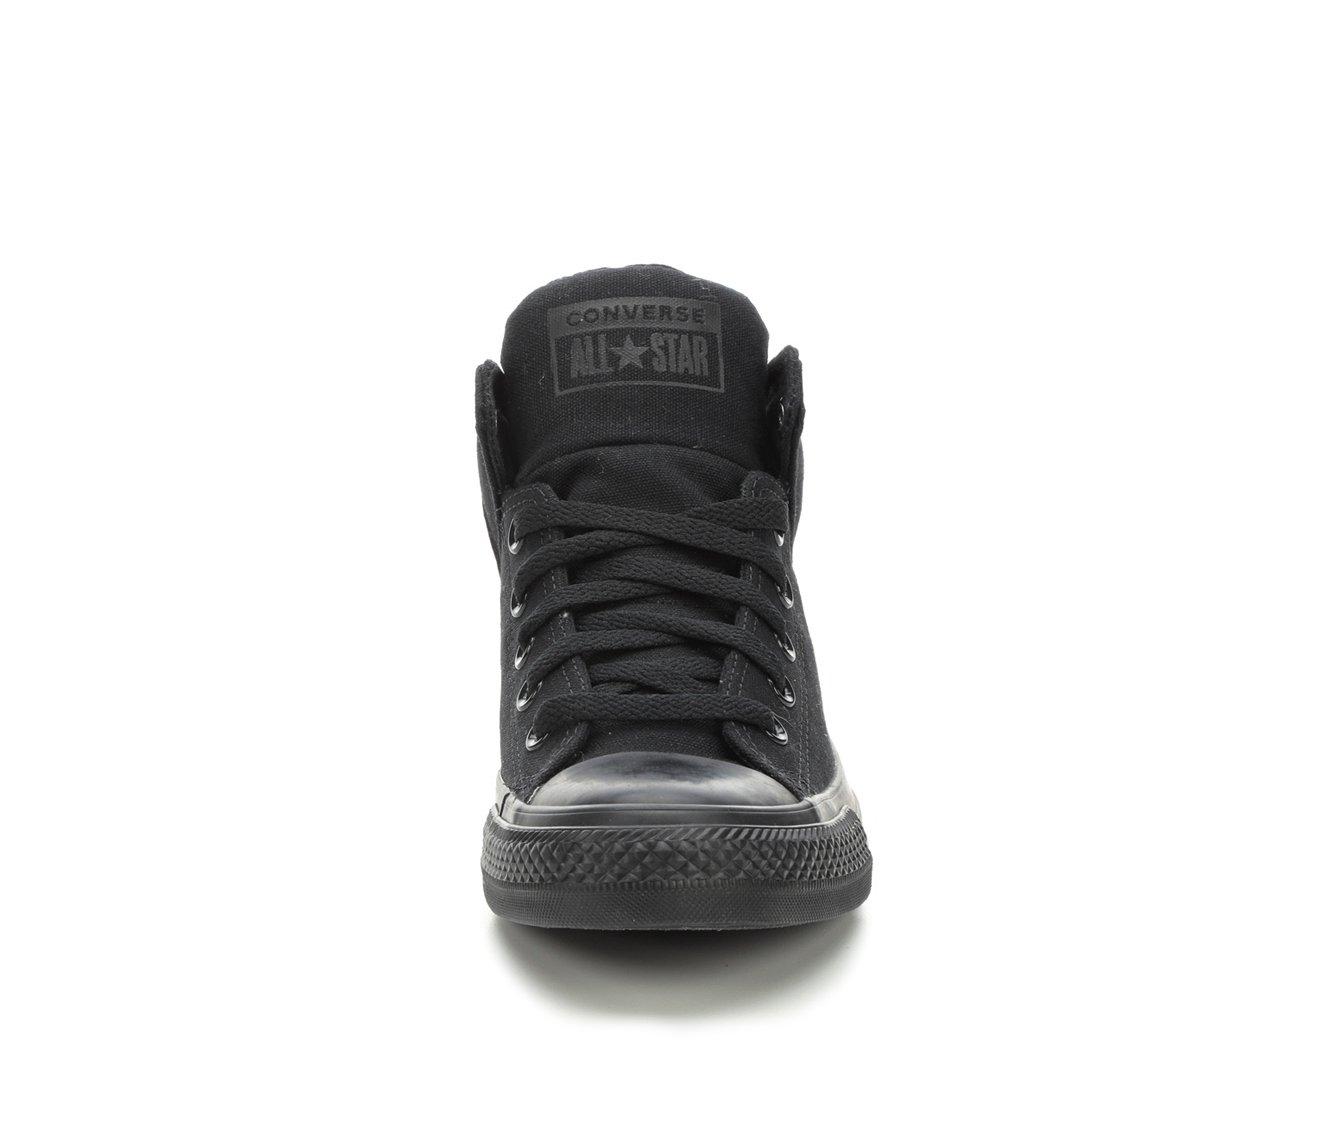 Adults' Converse Chuck Taylor All Star Foundation Hi Sneakers ...